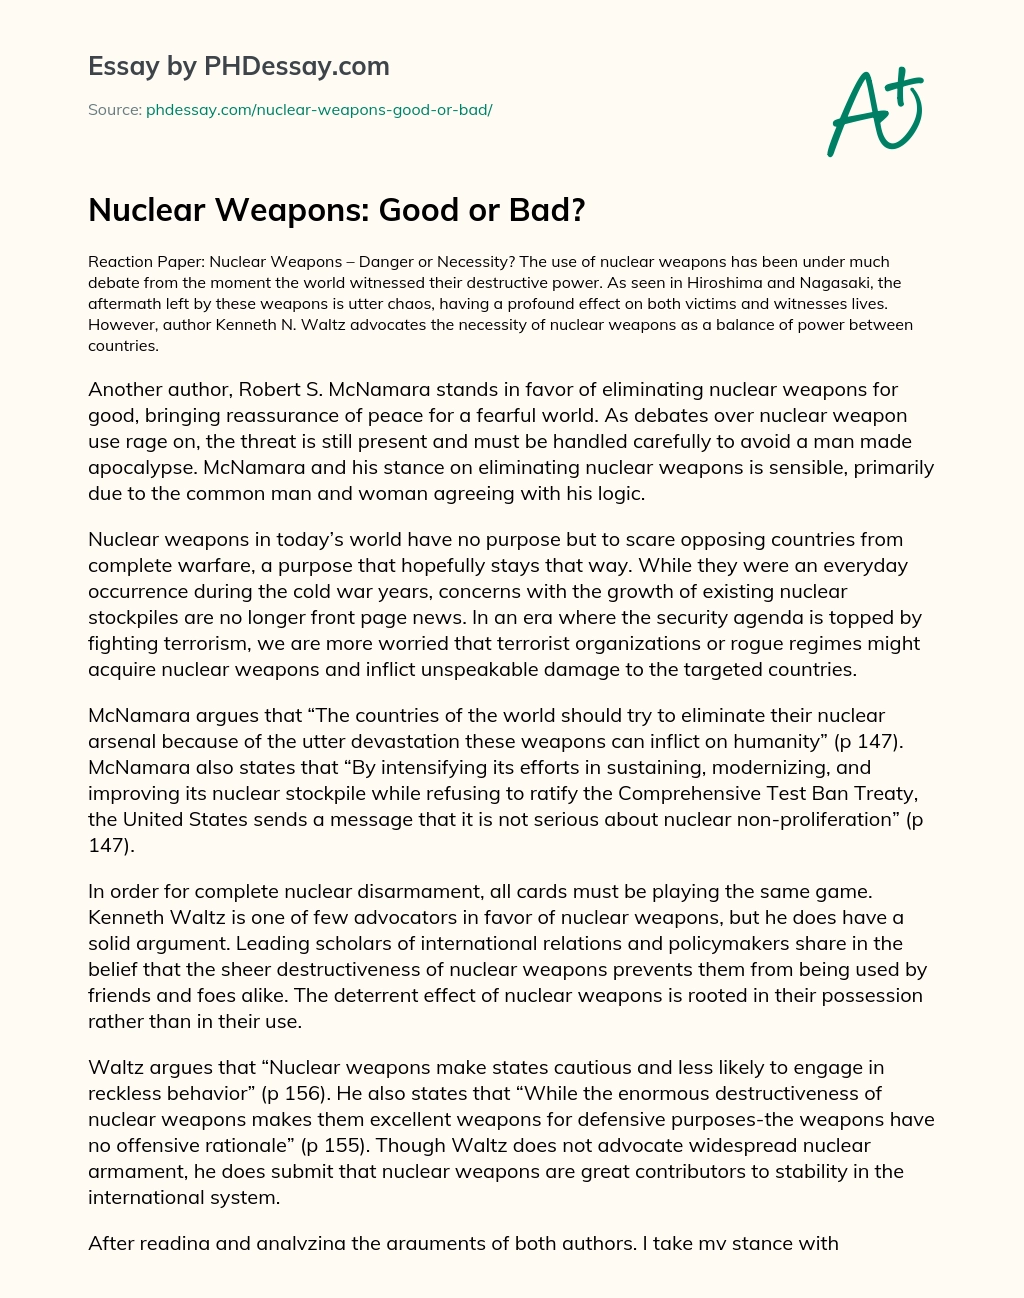 Nuclear Weapons: Good or Bad? essay